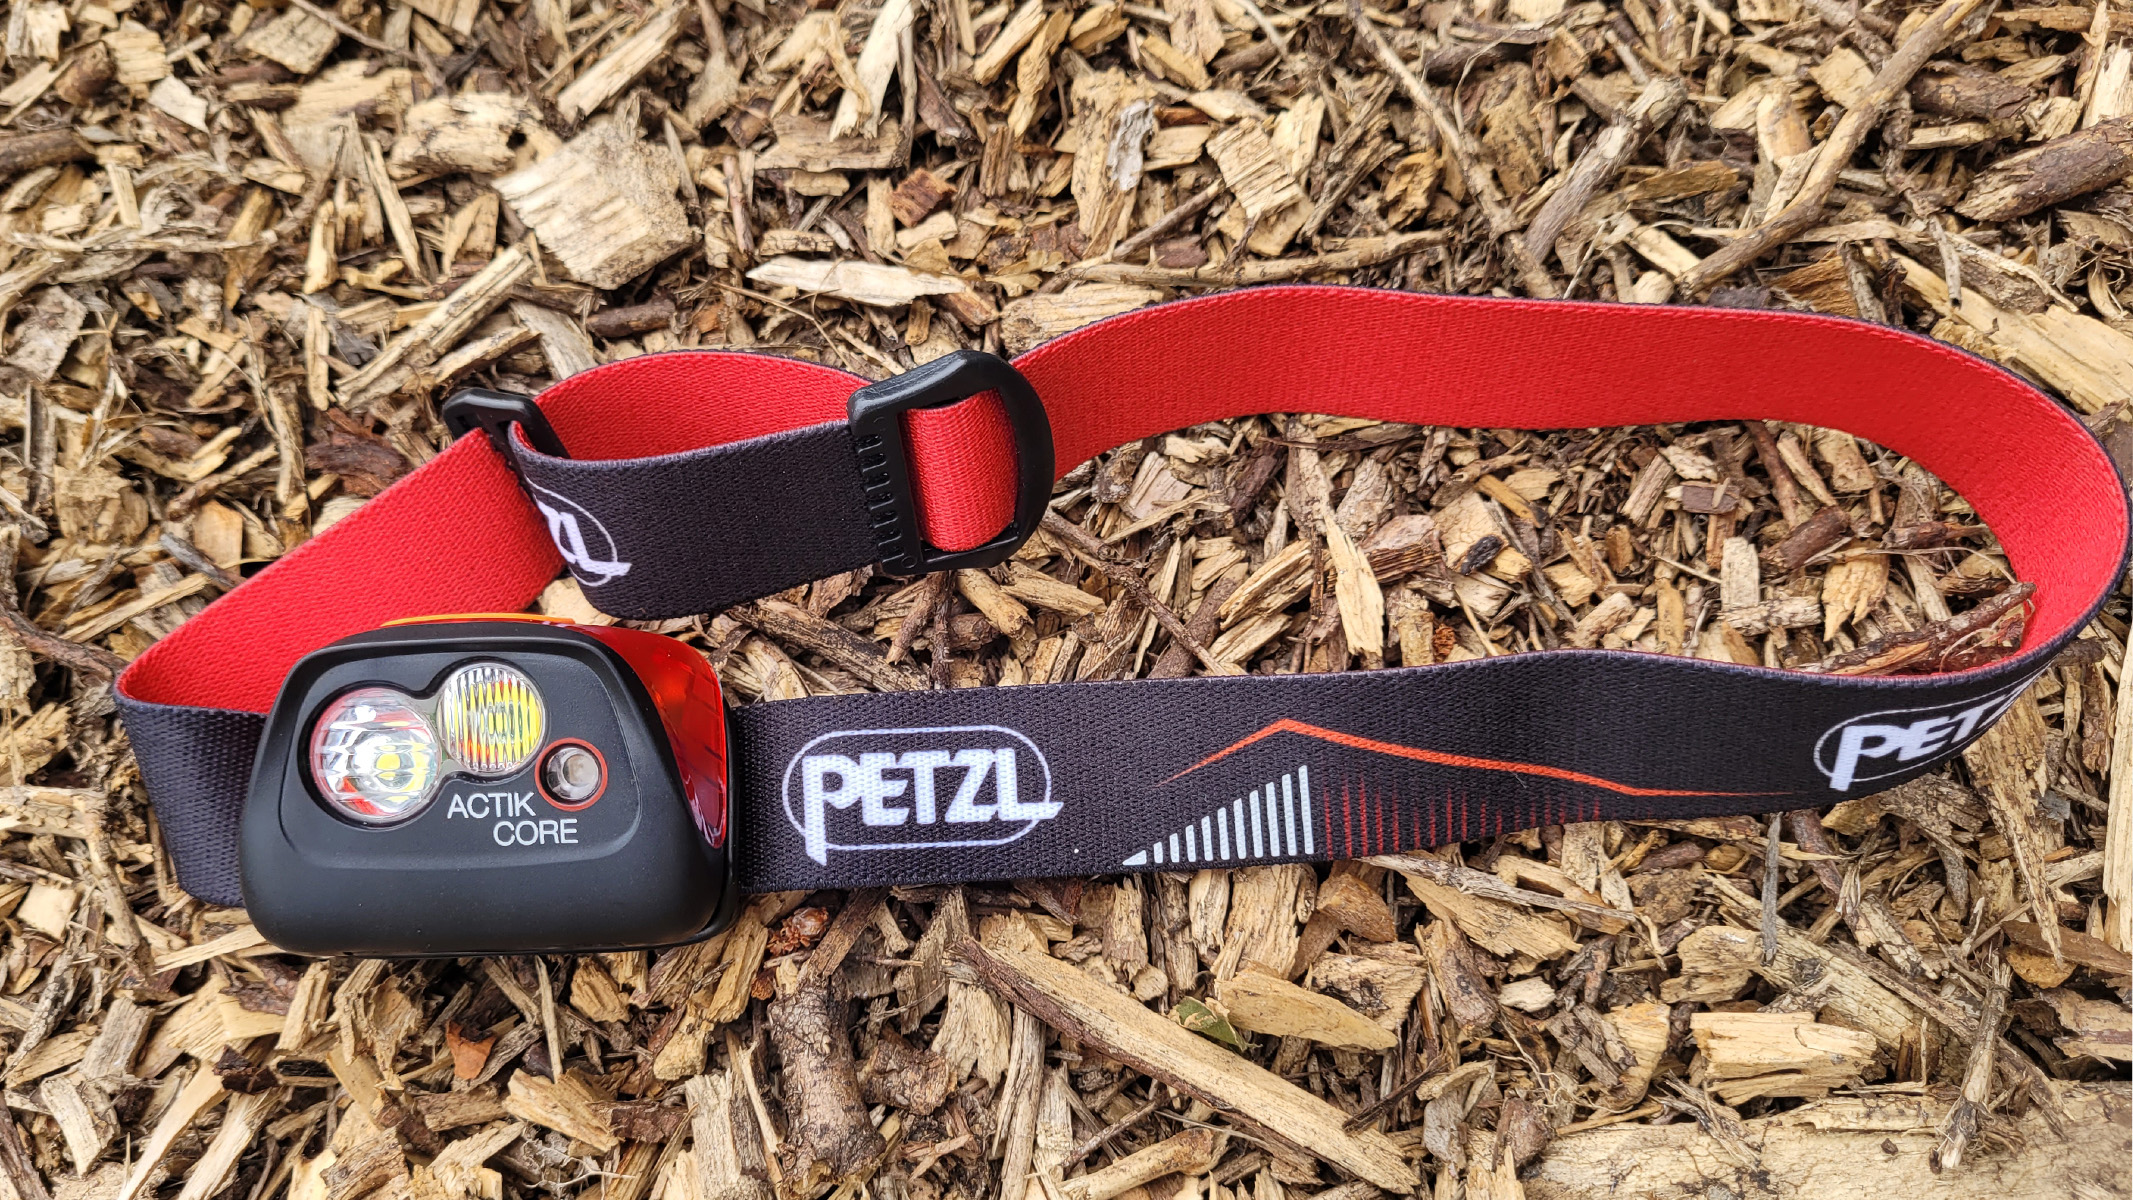 Photo of the Petzl Actik Core showing the reflective strips on the strap